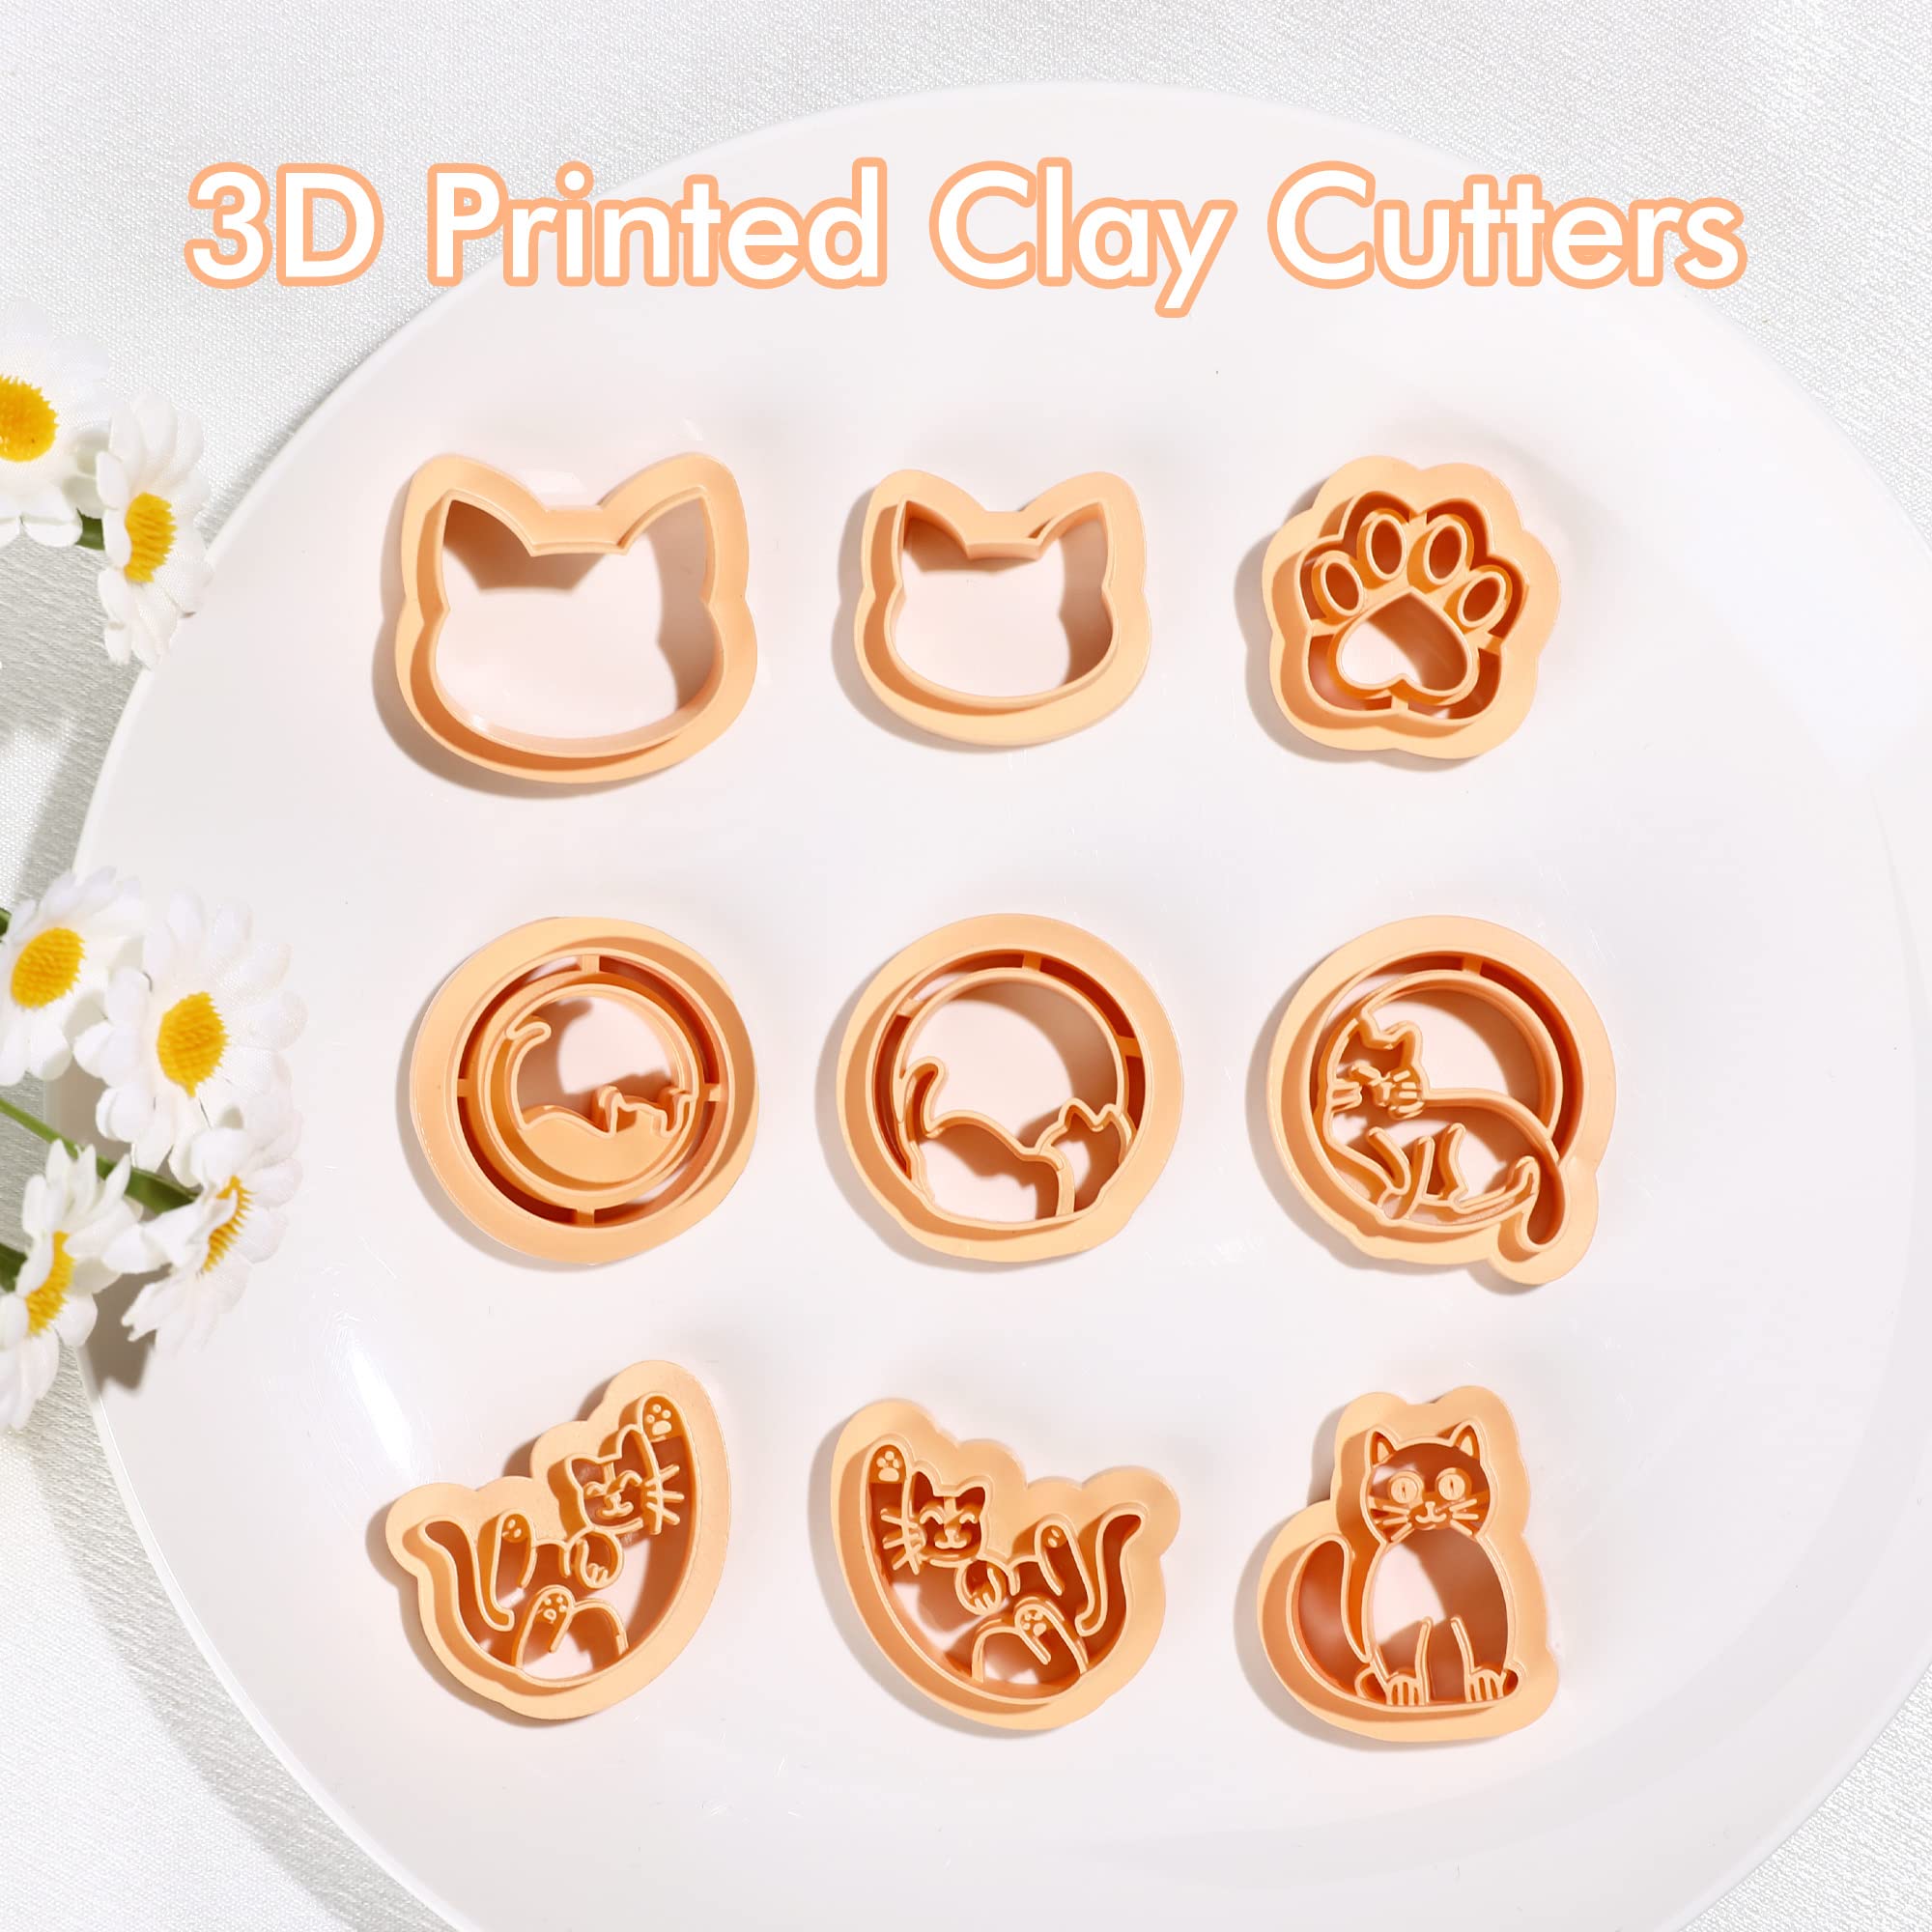 fuxiste 142 pcs polymer clay cutters, 24 shapes clay earring cutters